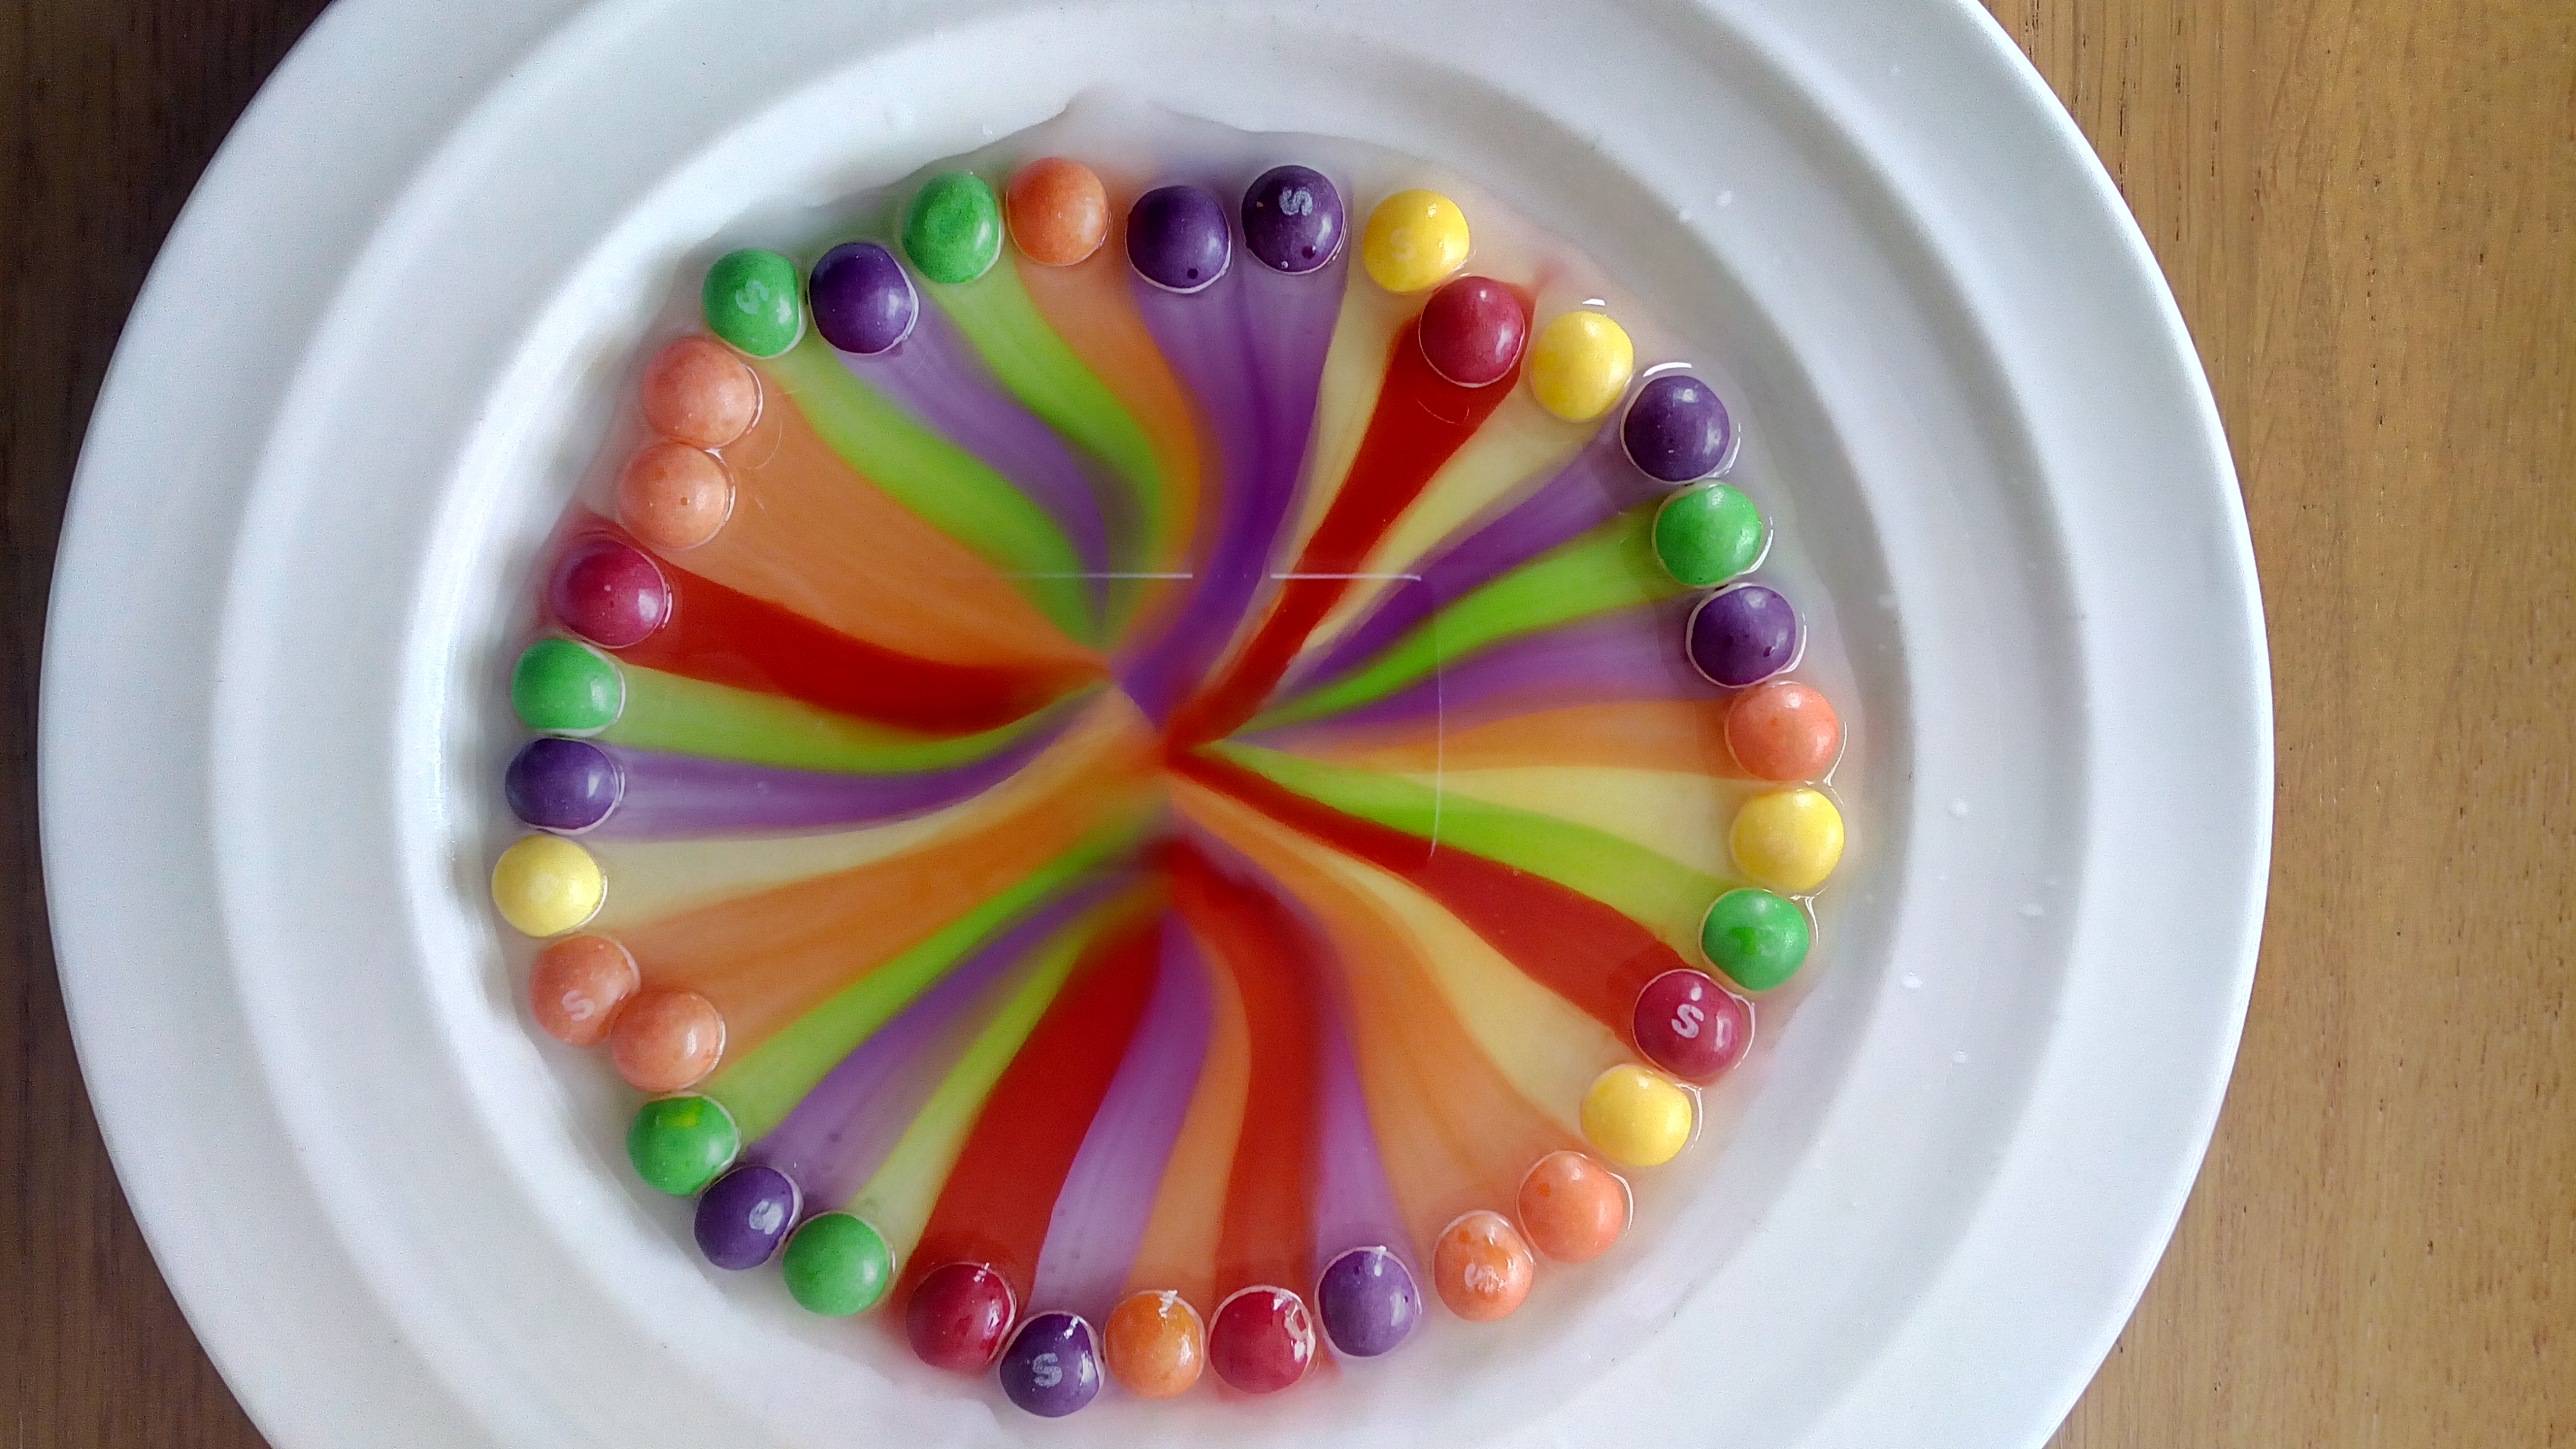 Rainbow on a plate experiment- try this amazing fun and exciting experiment at home with your kids and blow away your dinner guests with this party piece science experiment www.anyone4science.com